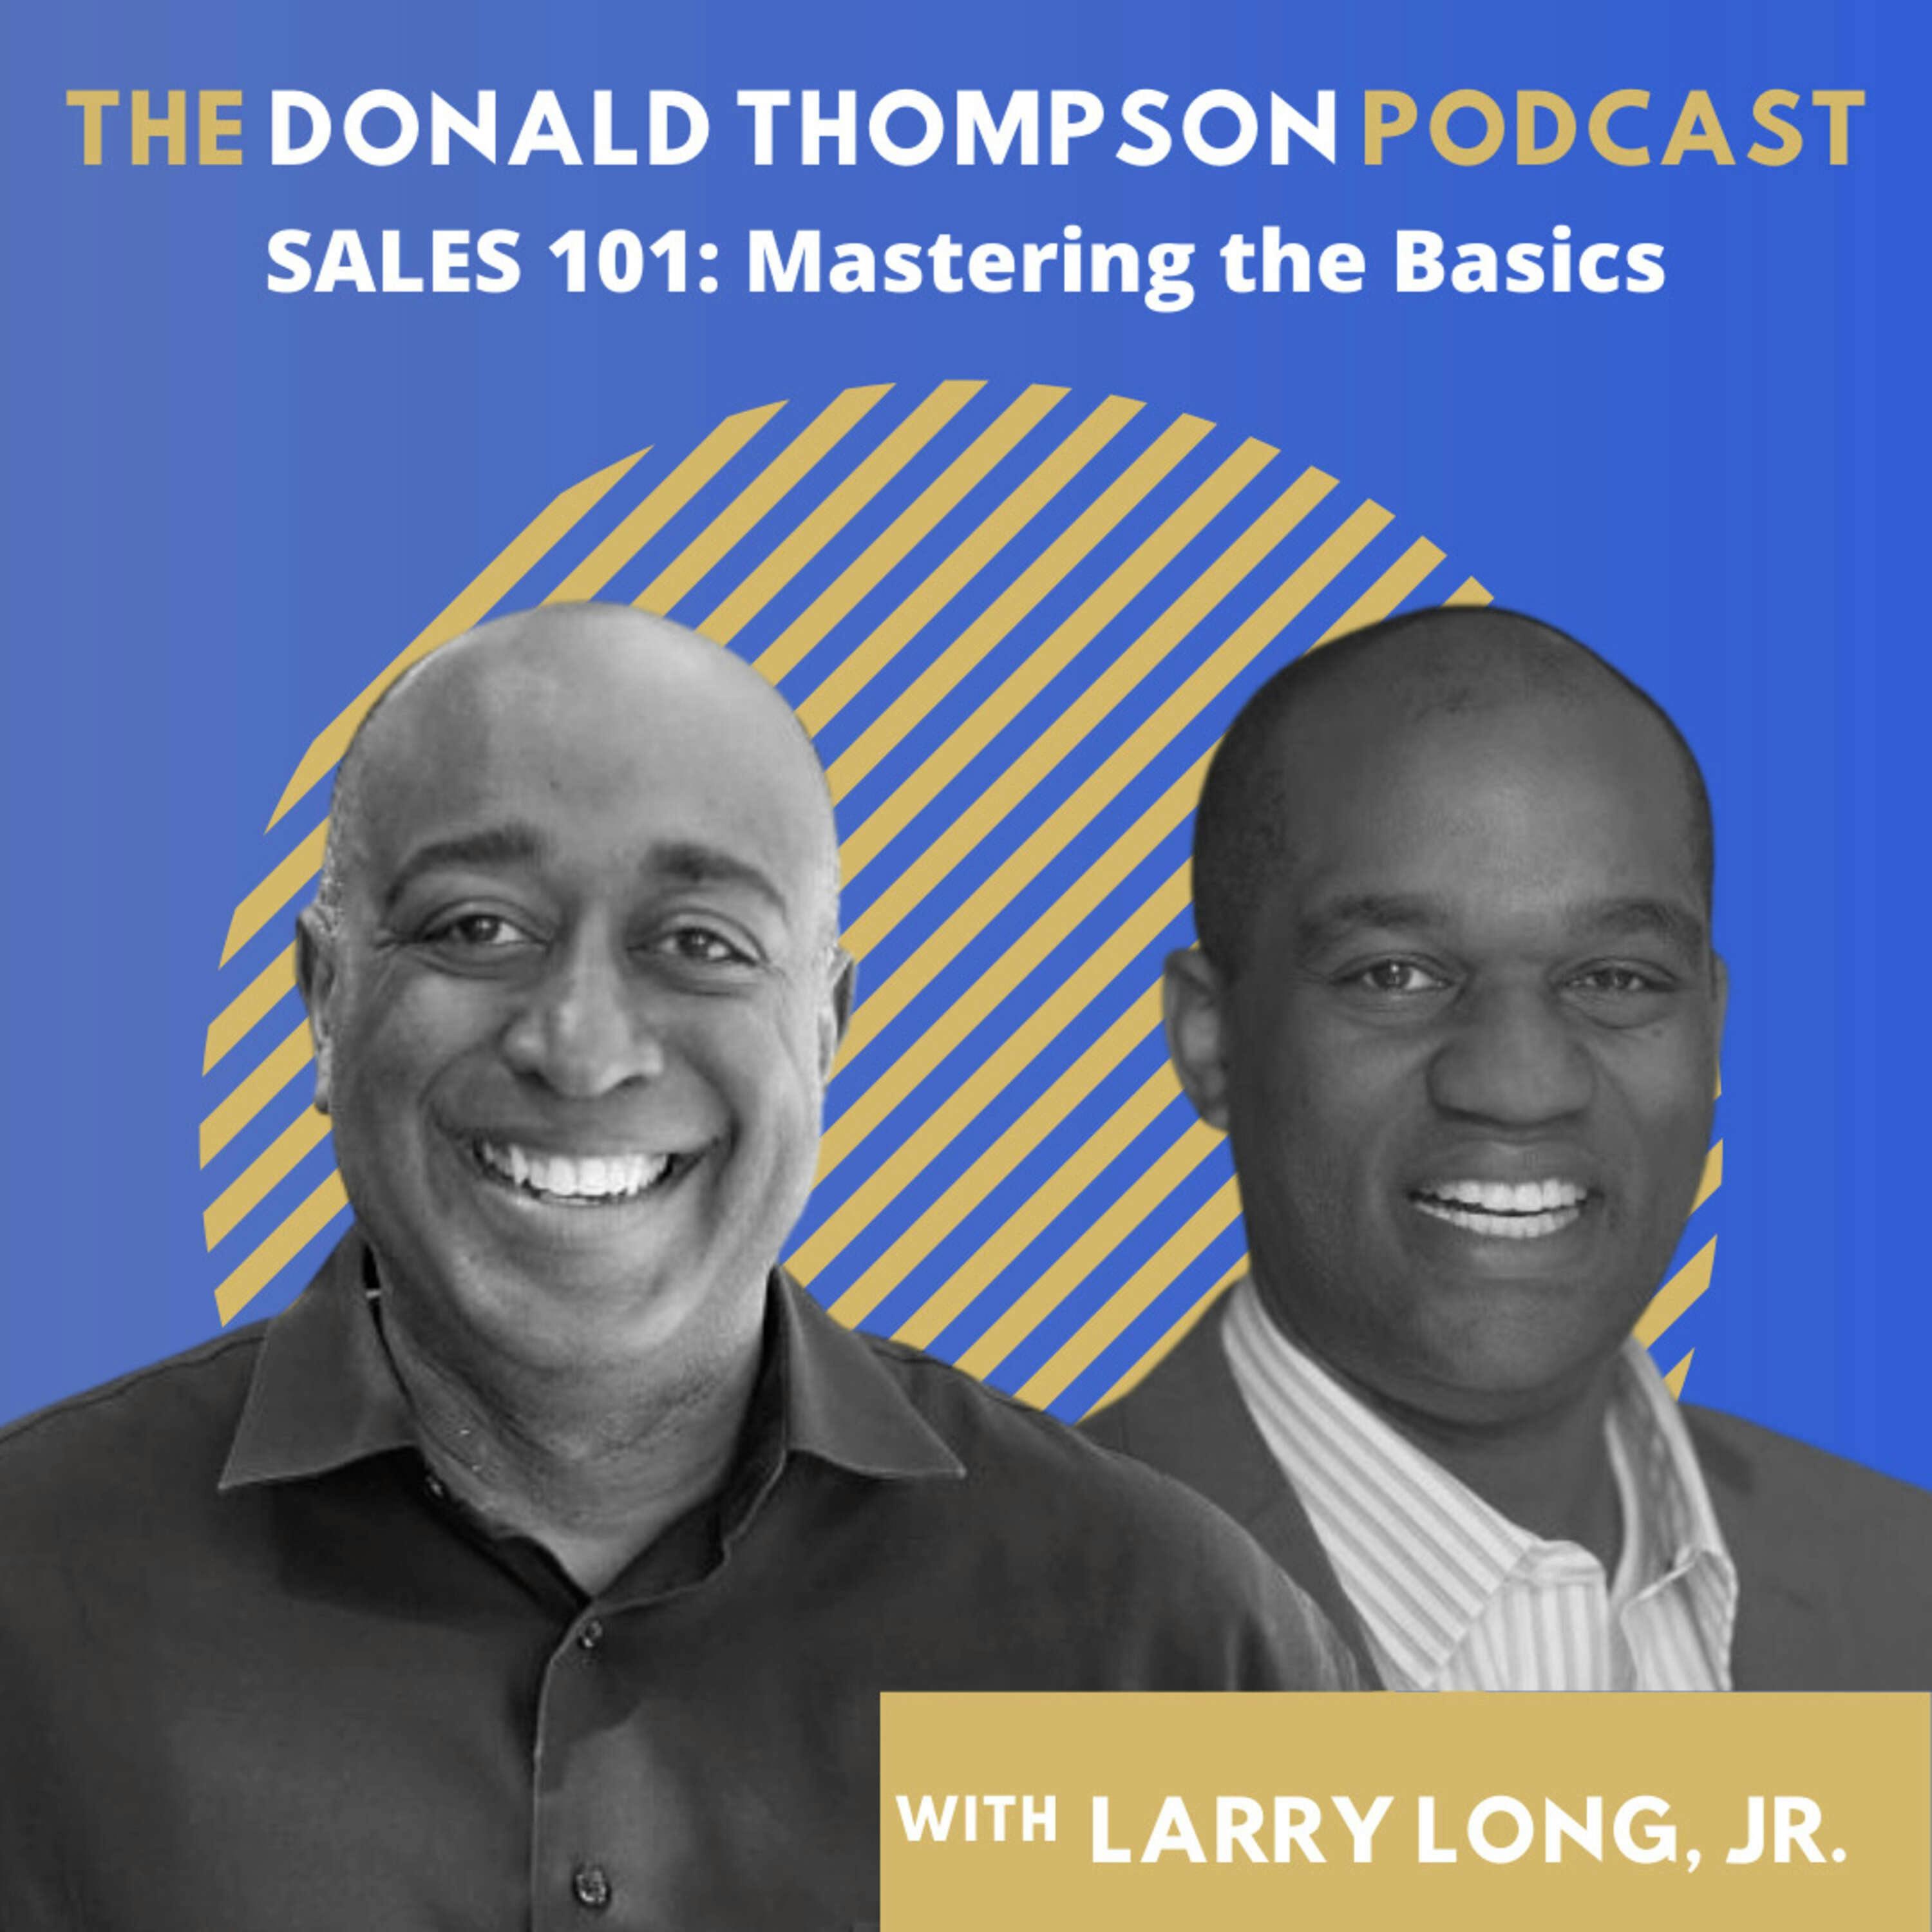 Sales 101: Mastering the Basics, with Larry Long Jr